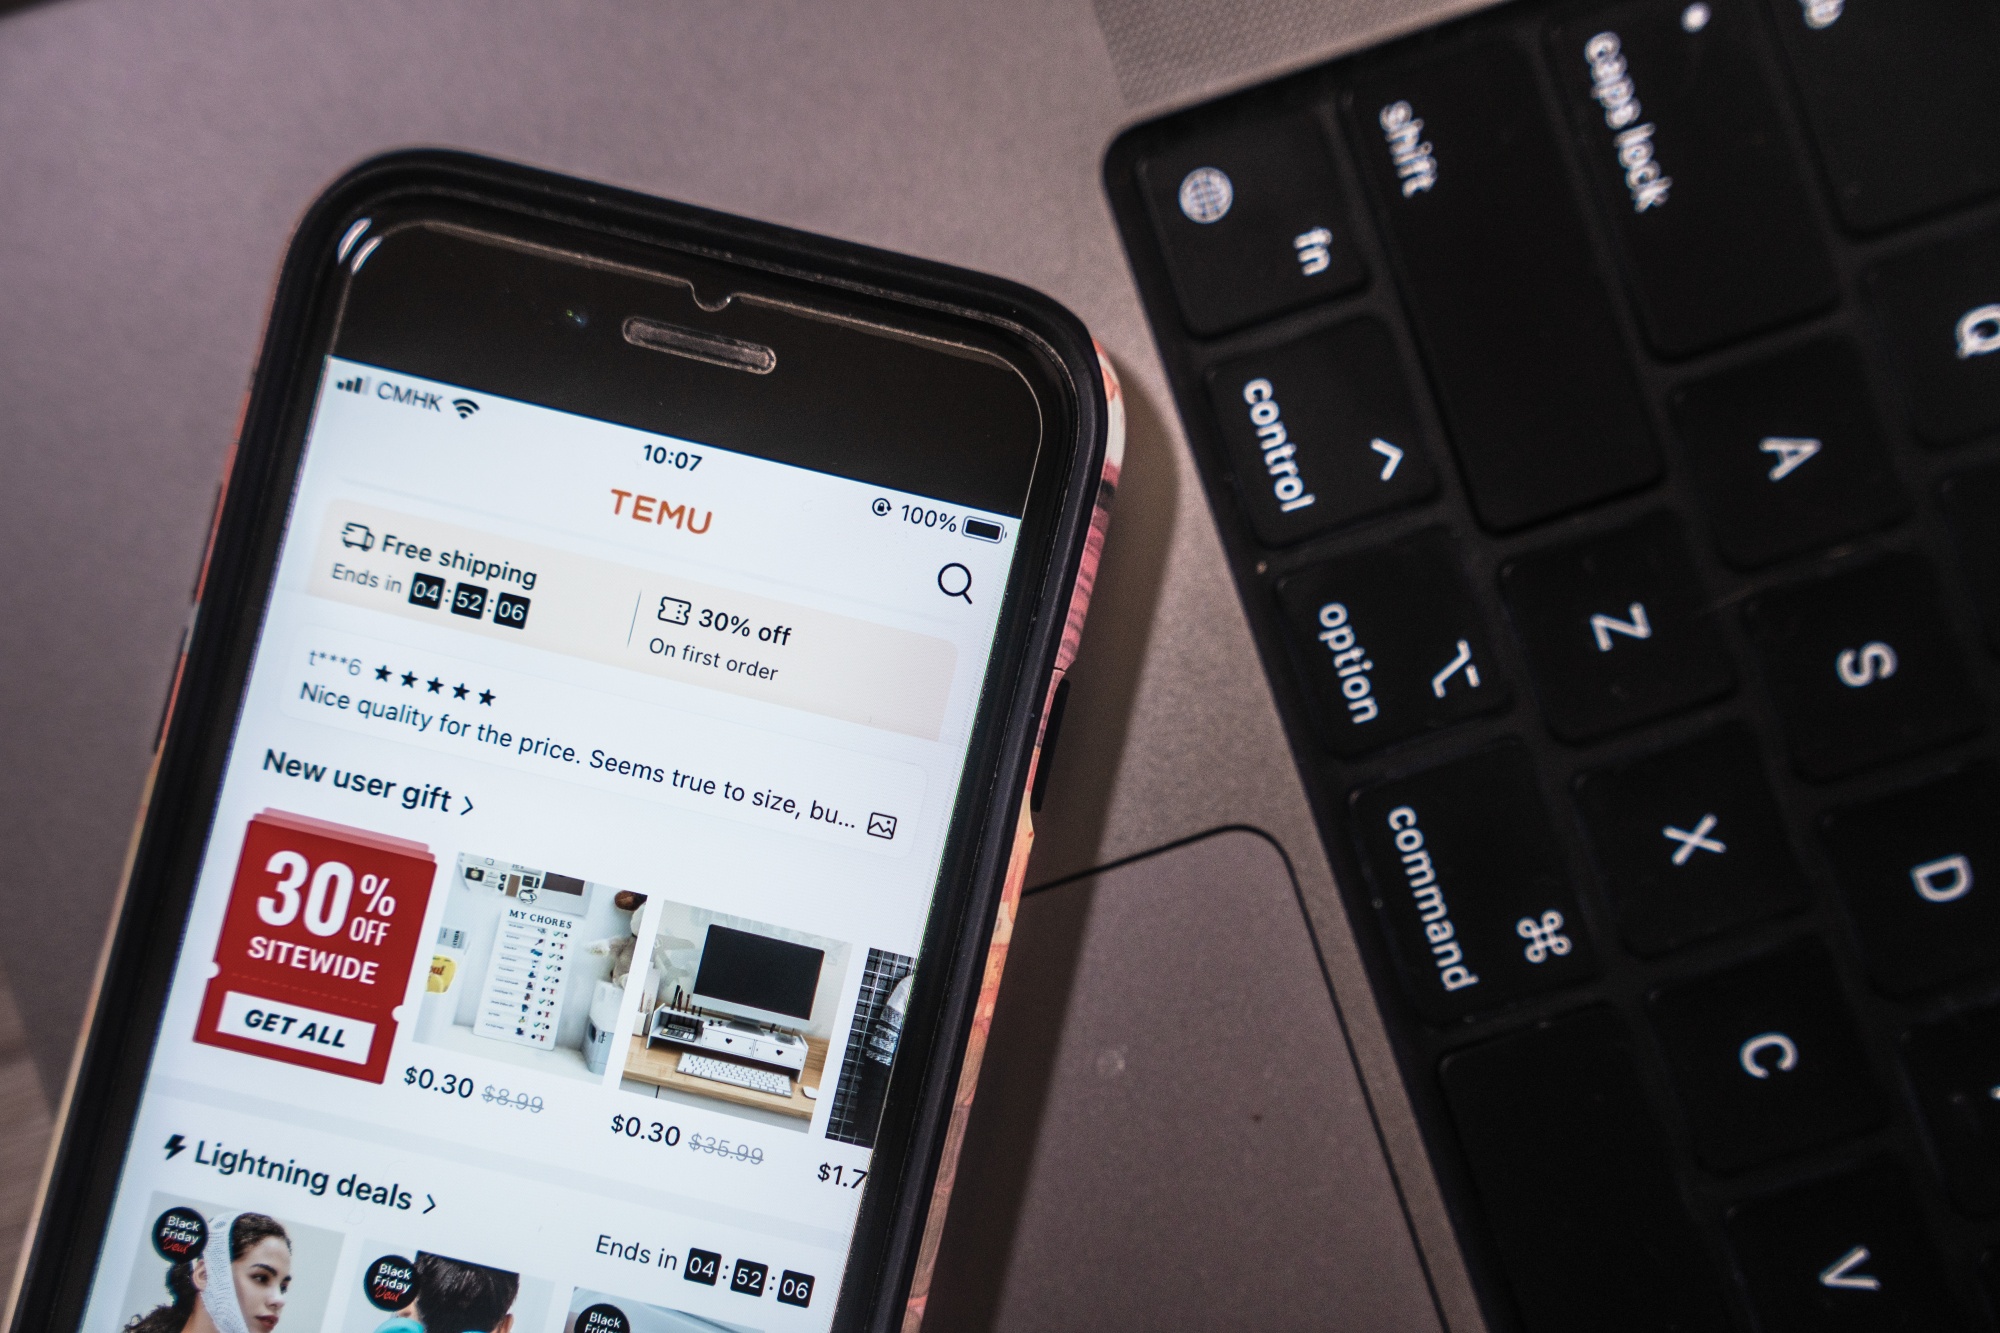 This obscure shopping app Temu is now America's most downloaded